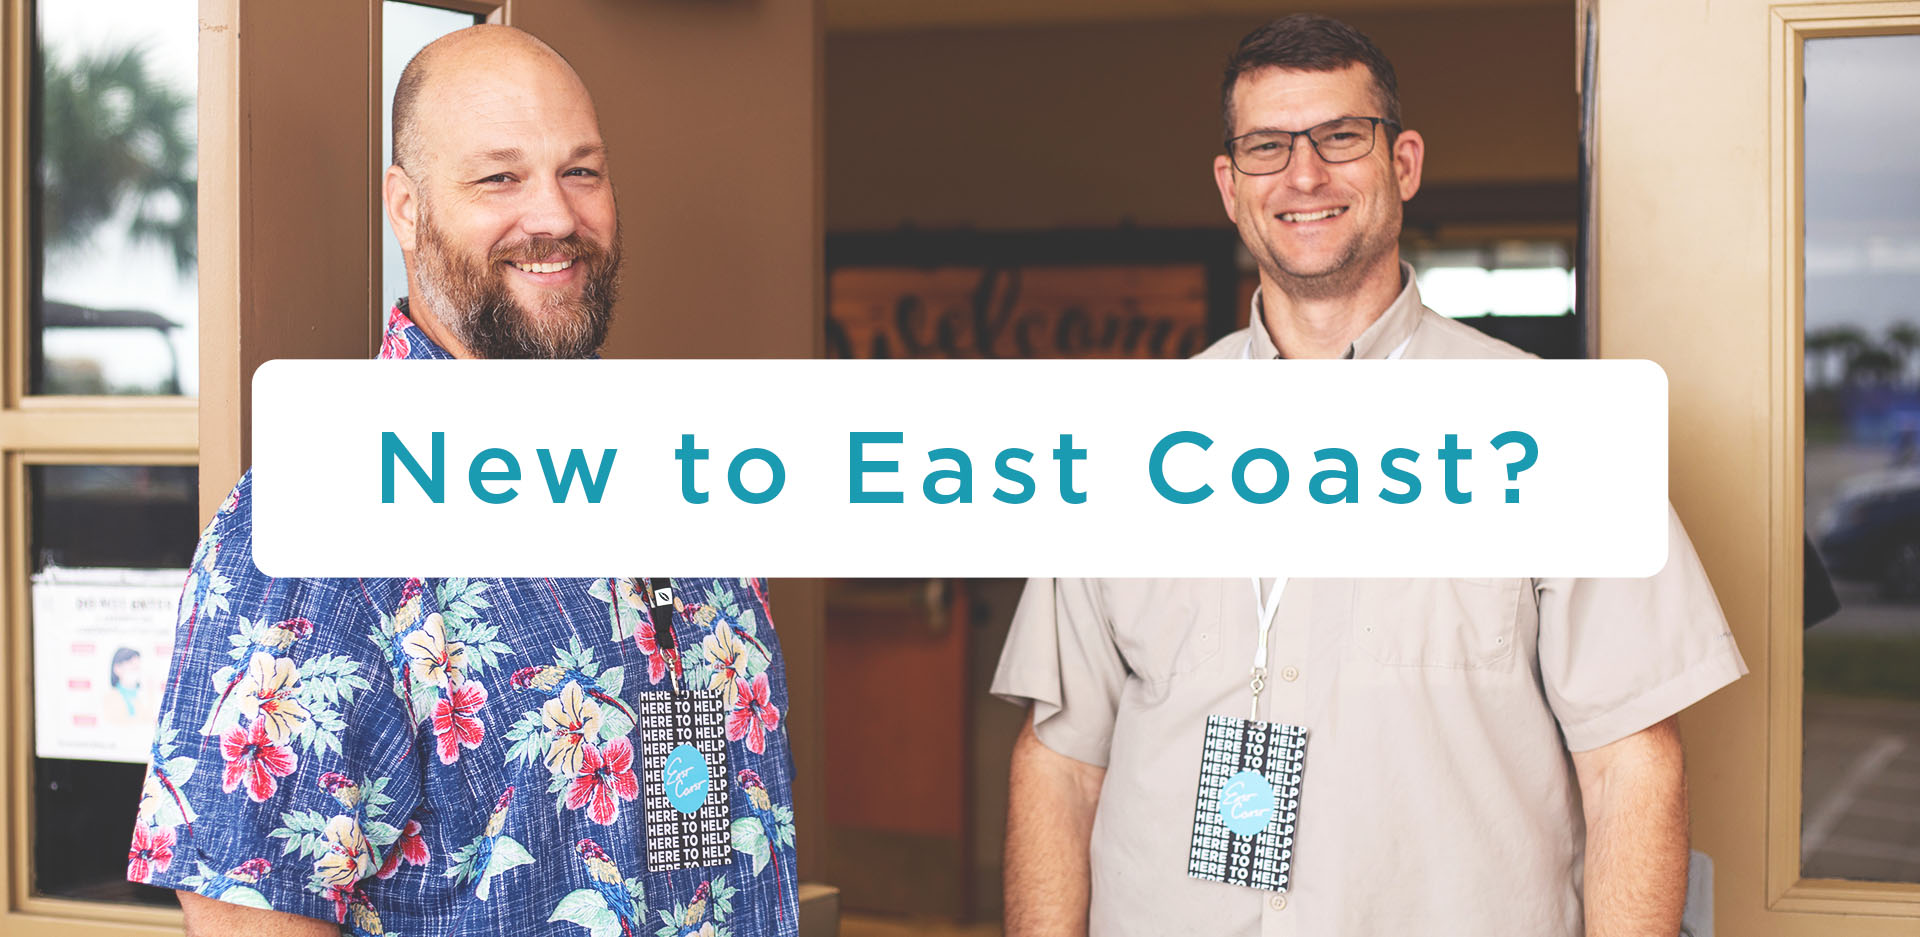 New to East Coast? Click here to learn more!